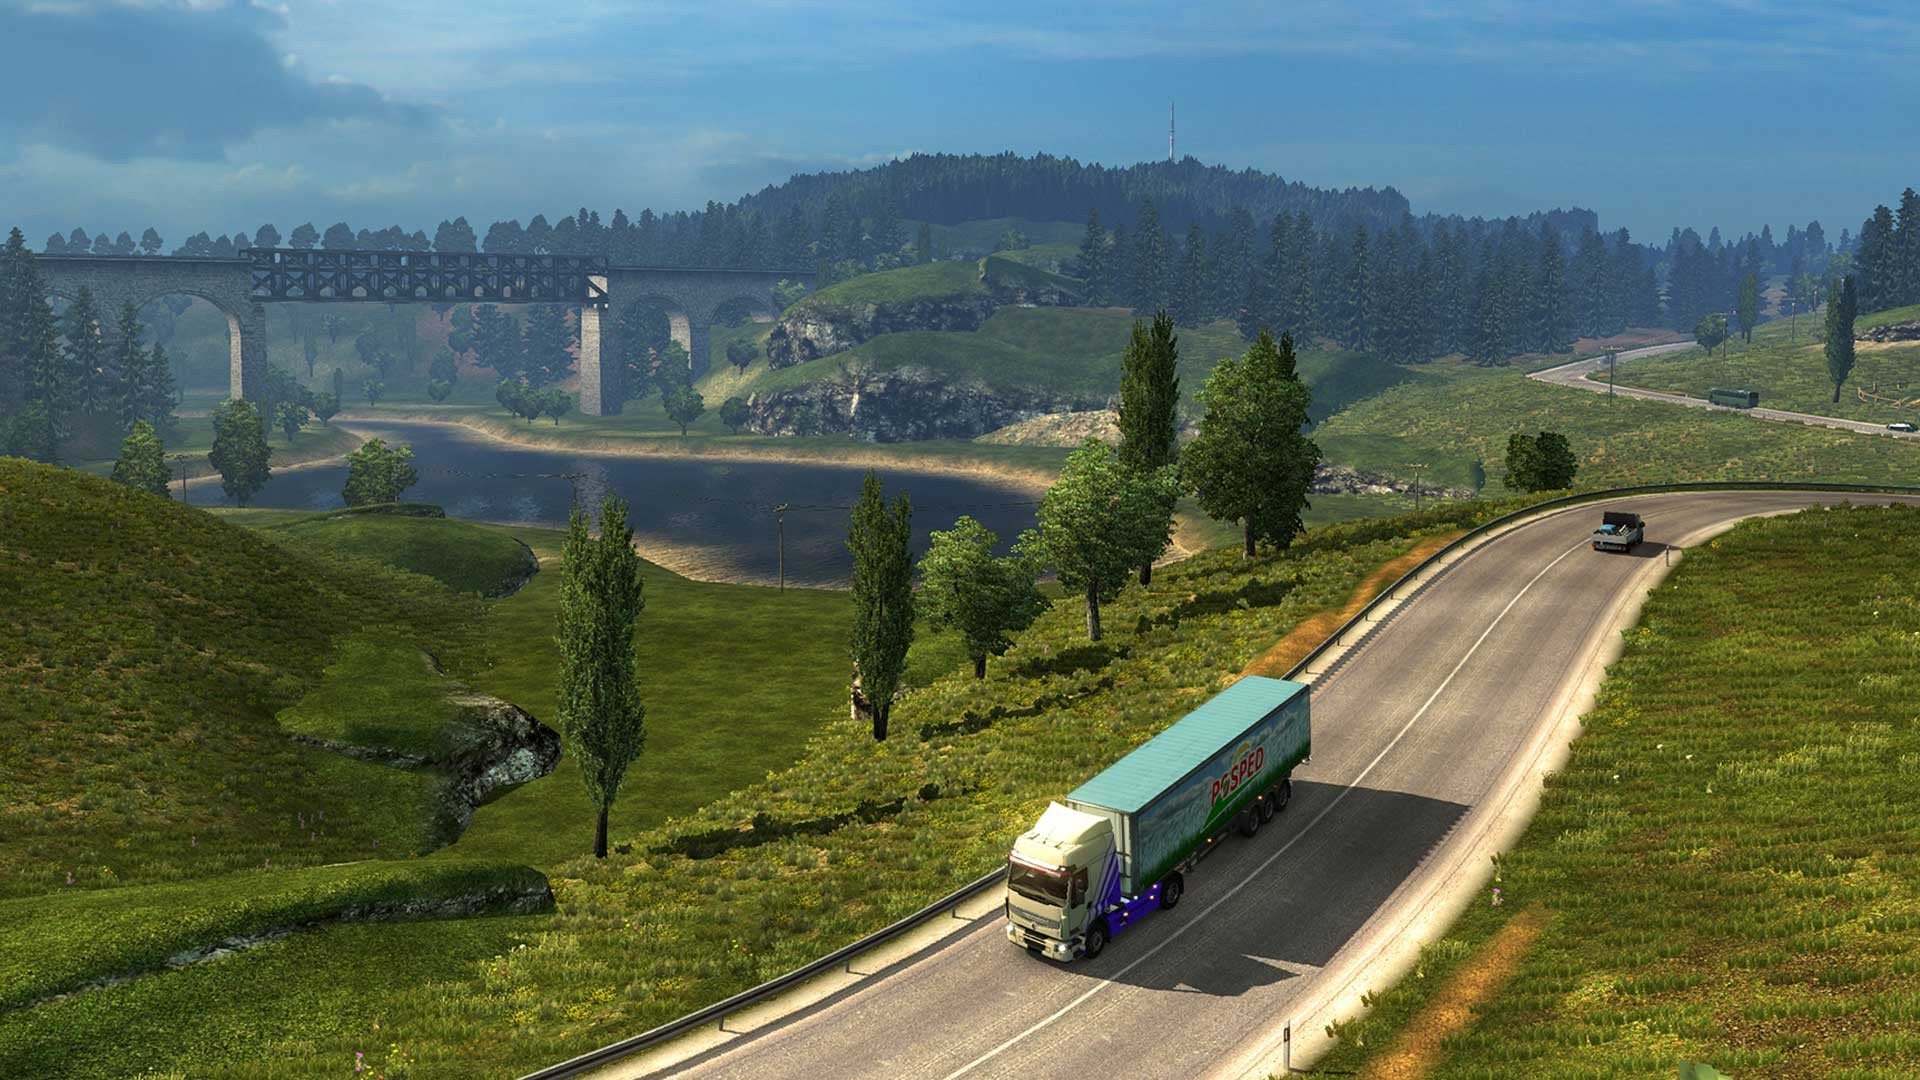 Buy Euro Truck Simulator 2 - Complete Edition (PC/MAC) game Online